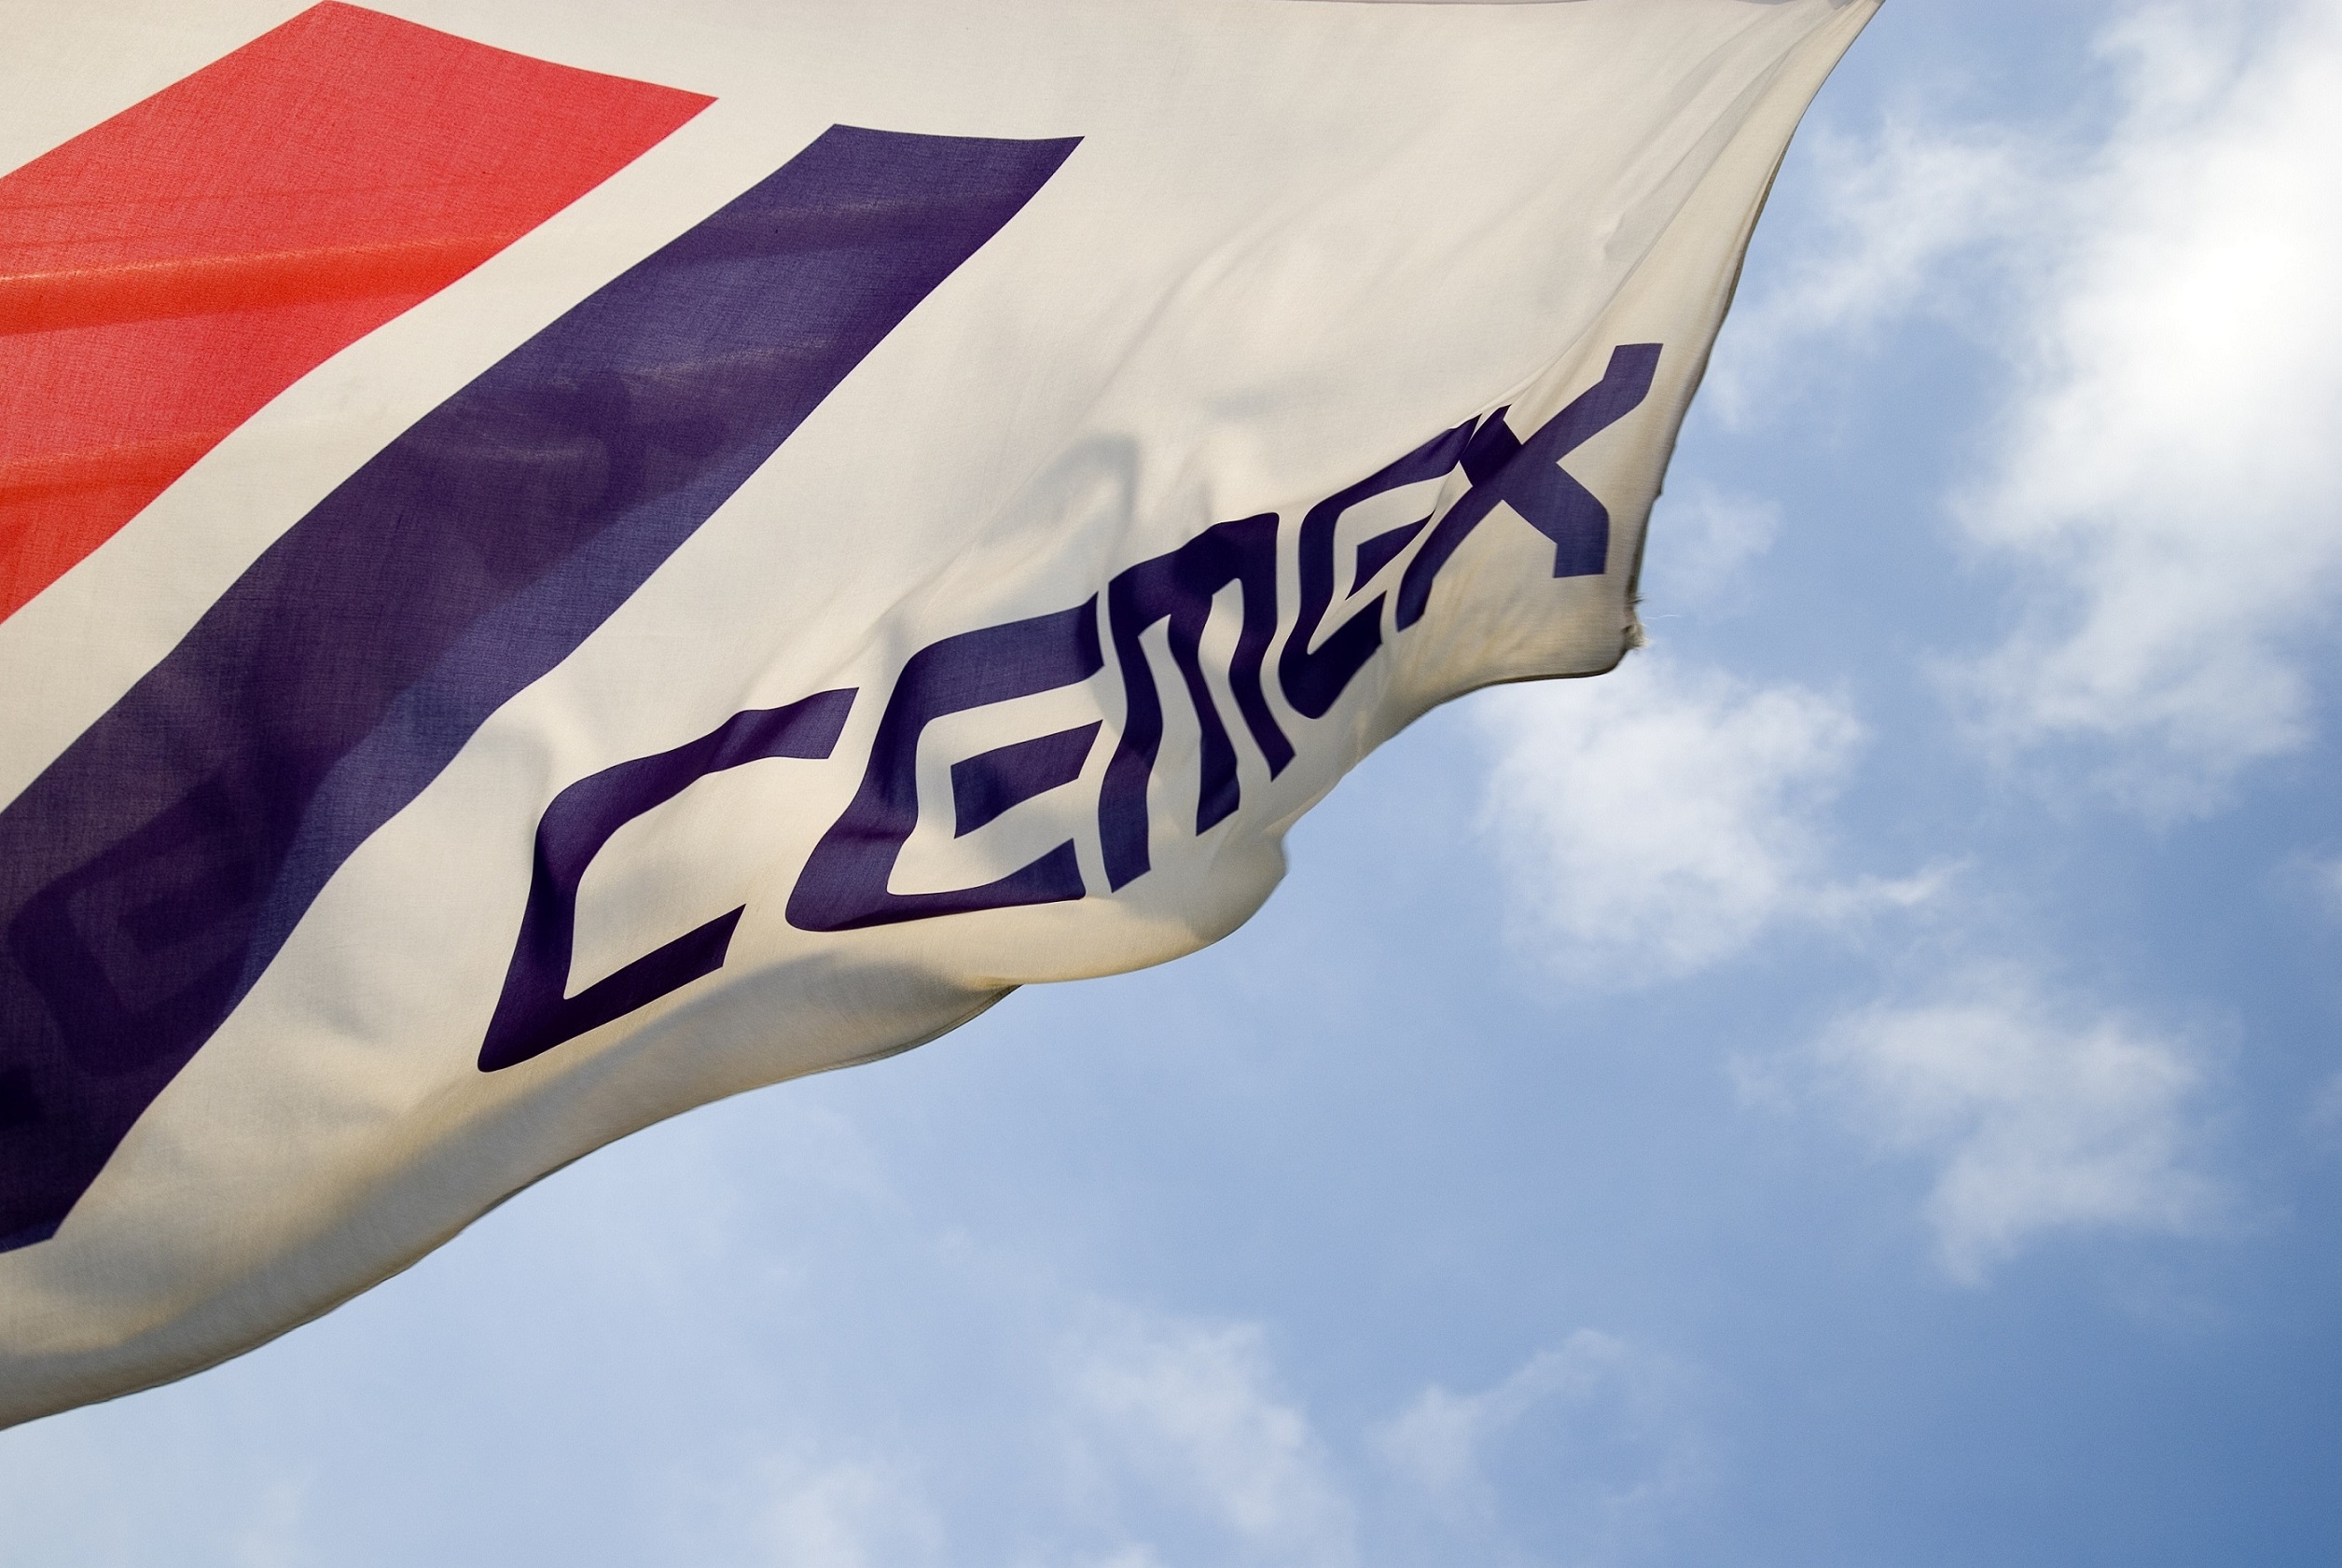 SBTi says CEMEX's climate targets are in line with the Paris Agreement